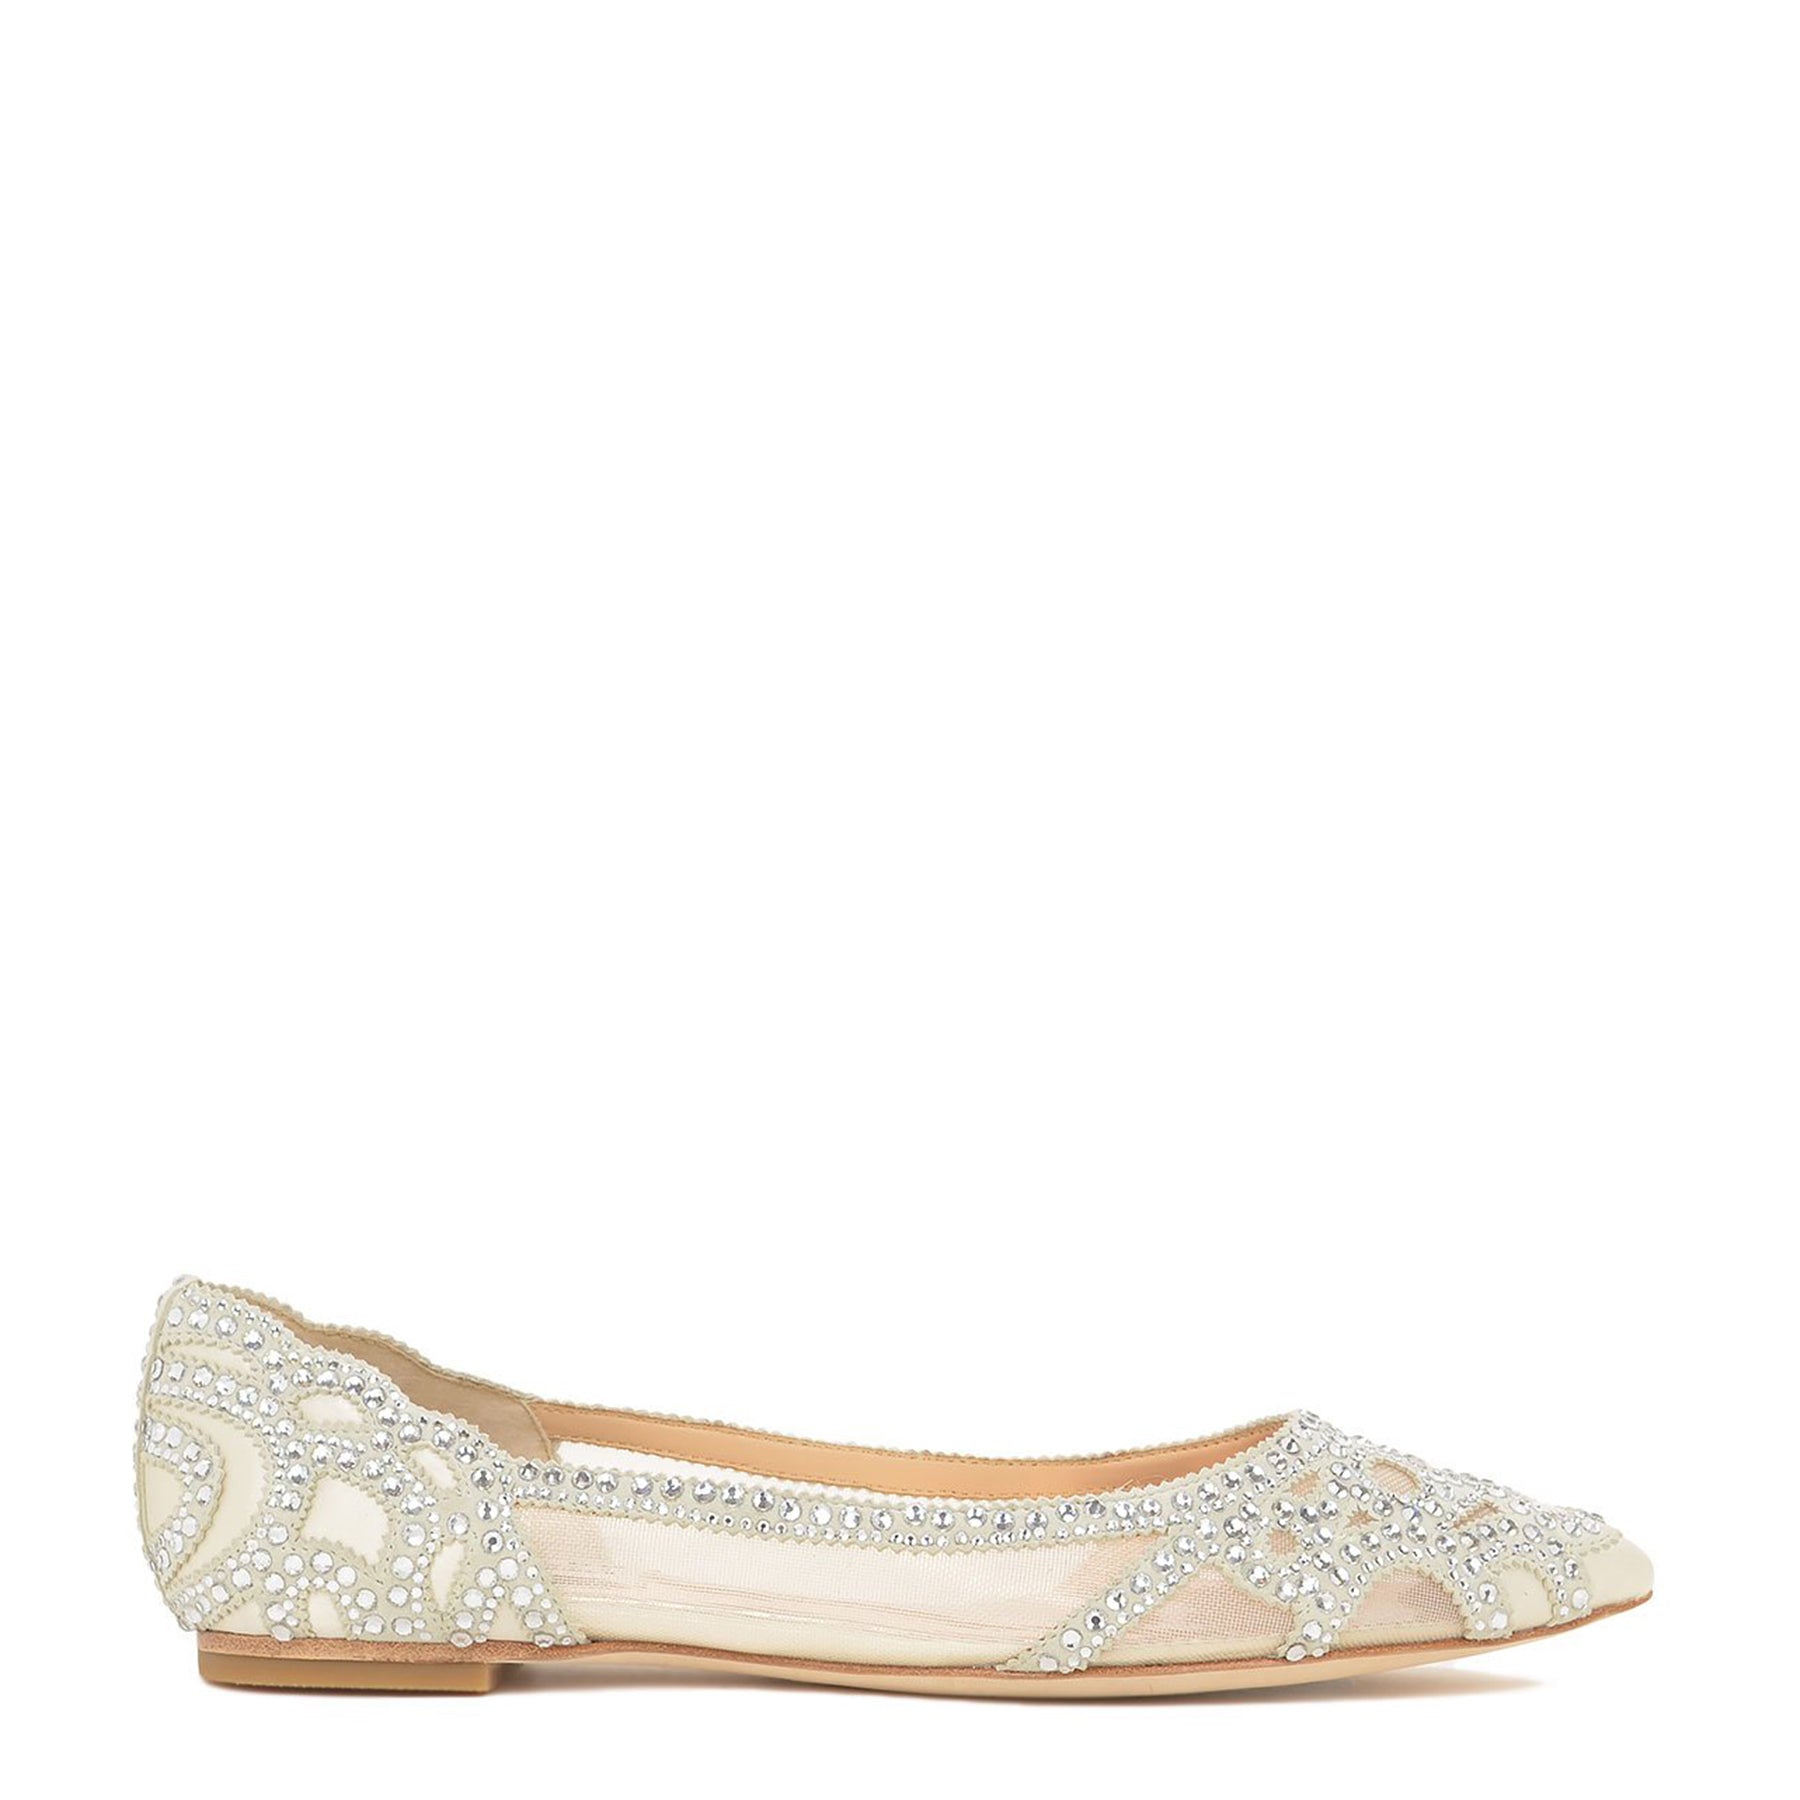 Designer Flat Wedding Shoes | Designer Bridal Flats Perfect for Dancing |  The White Collection